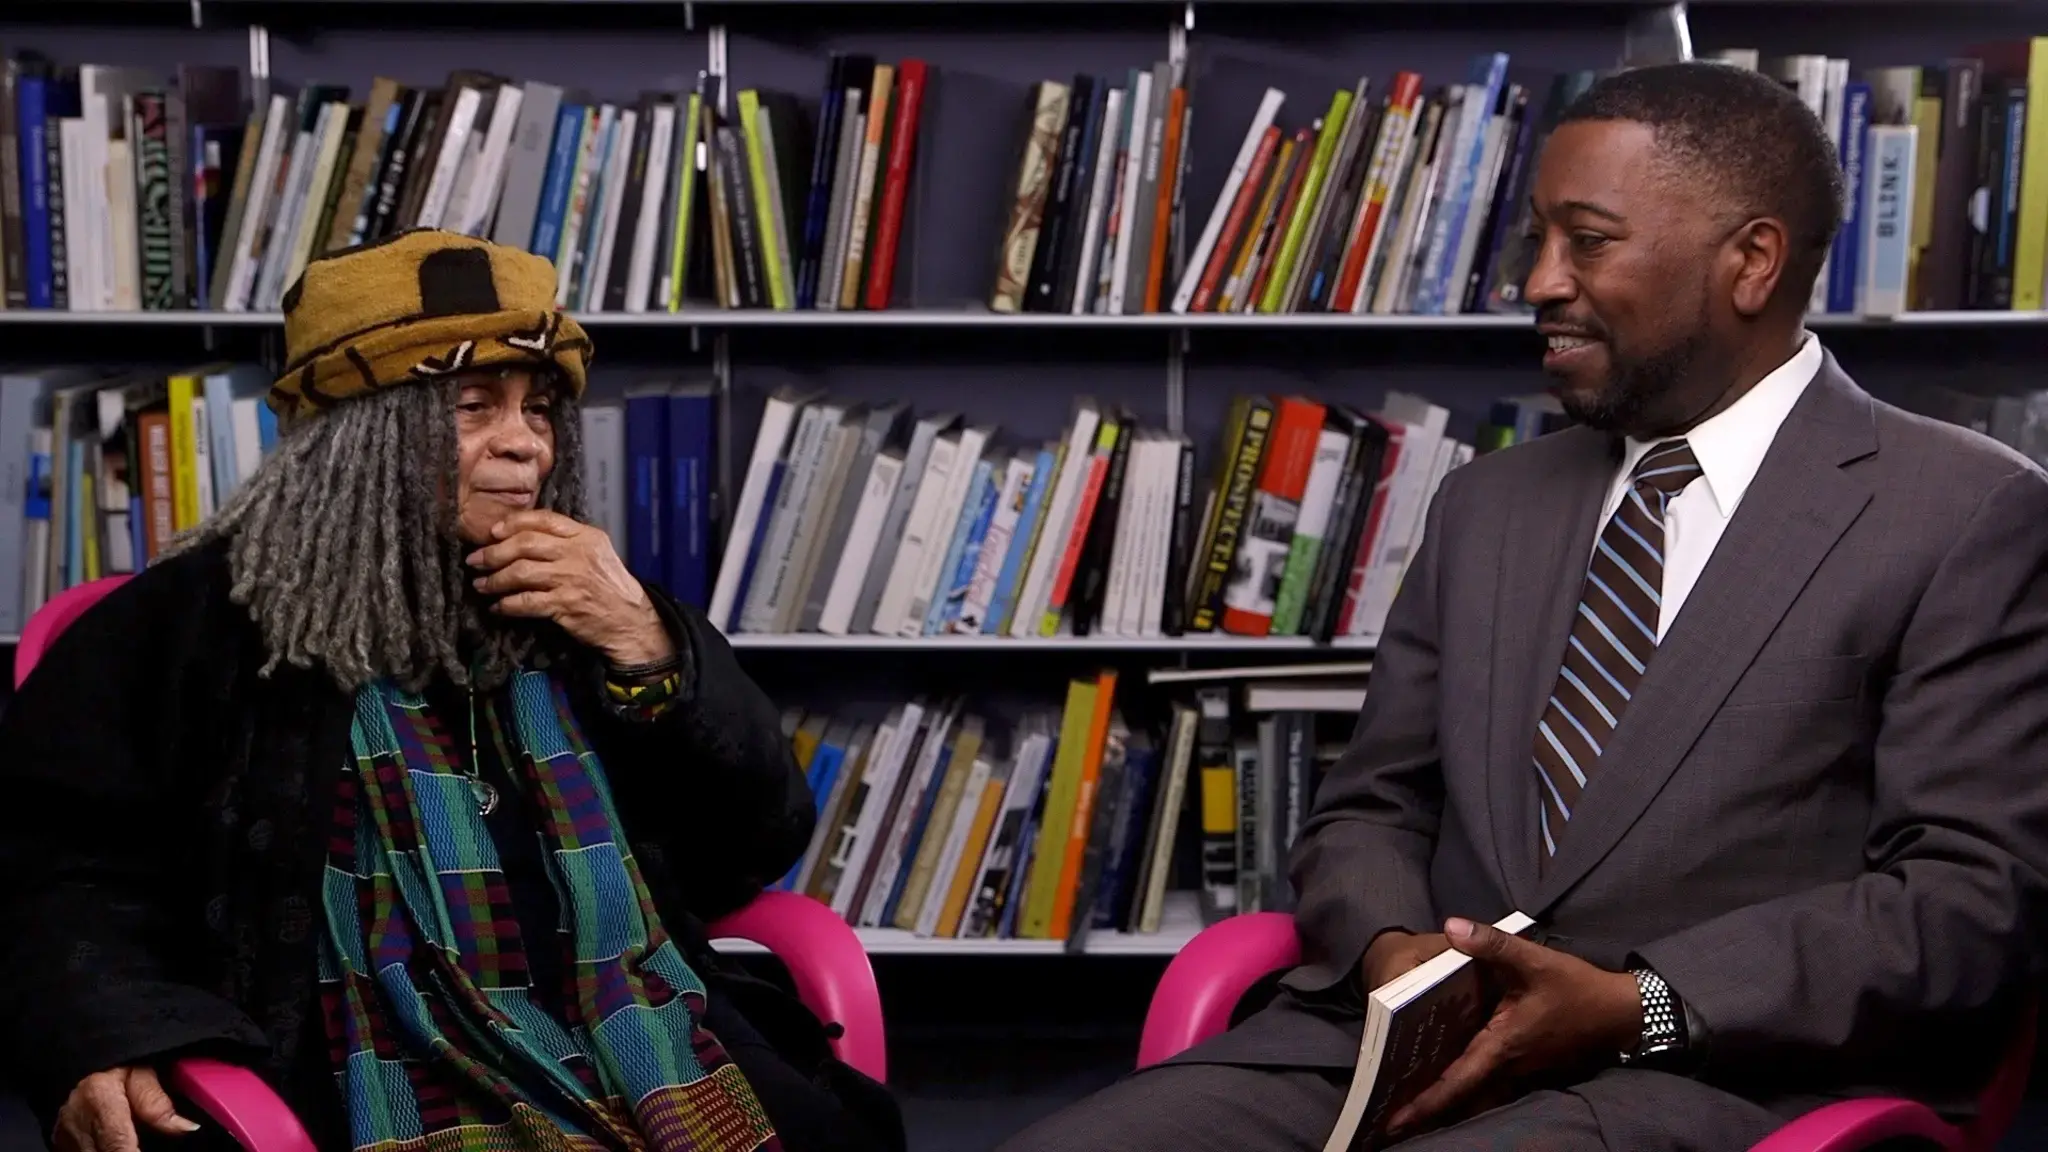 Poets and Pew Fellows Sonia Sanchez and Major Jackson in conversation.